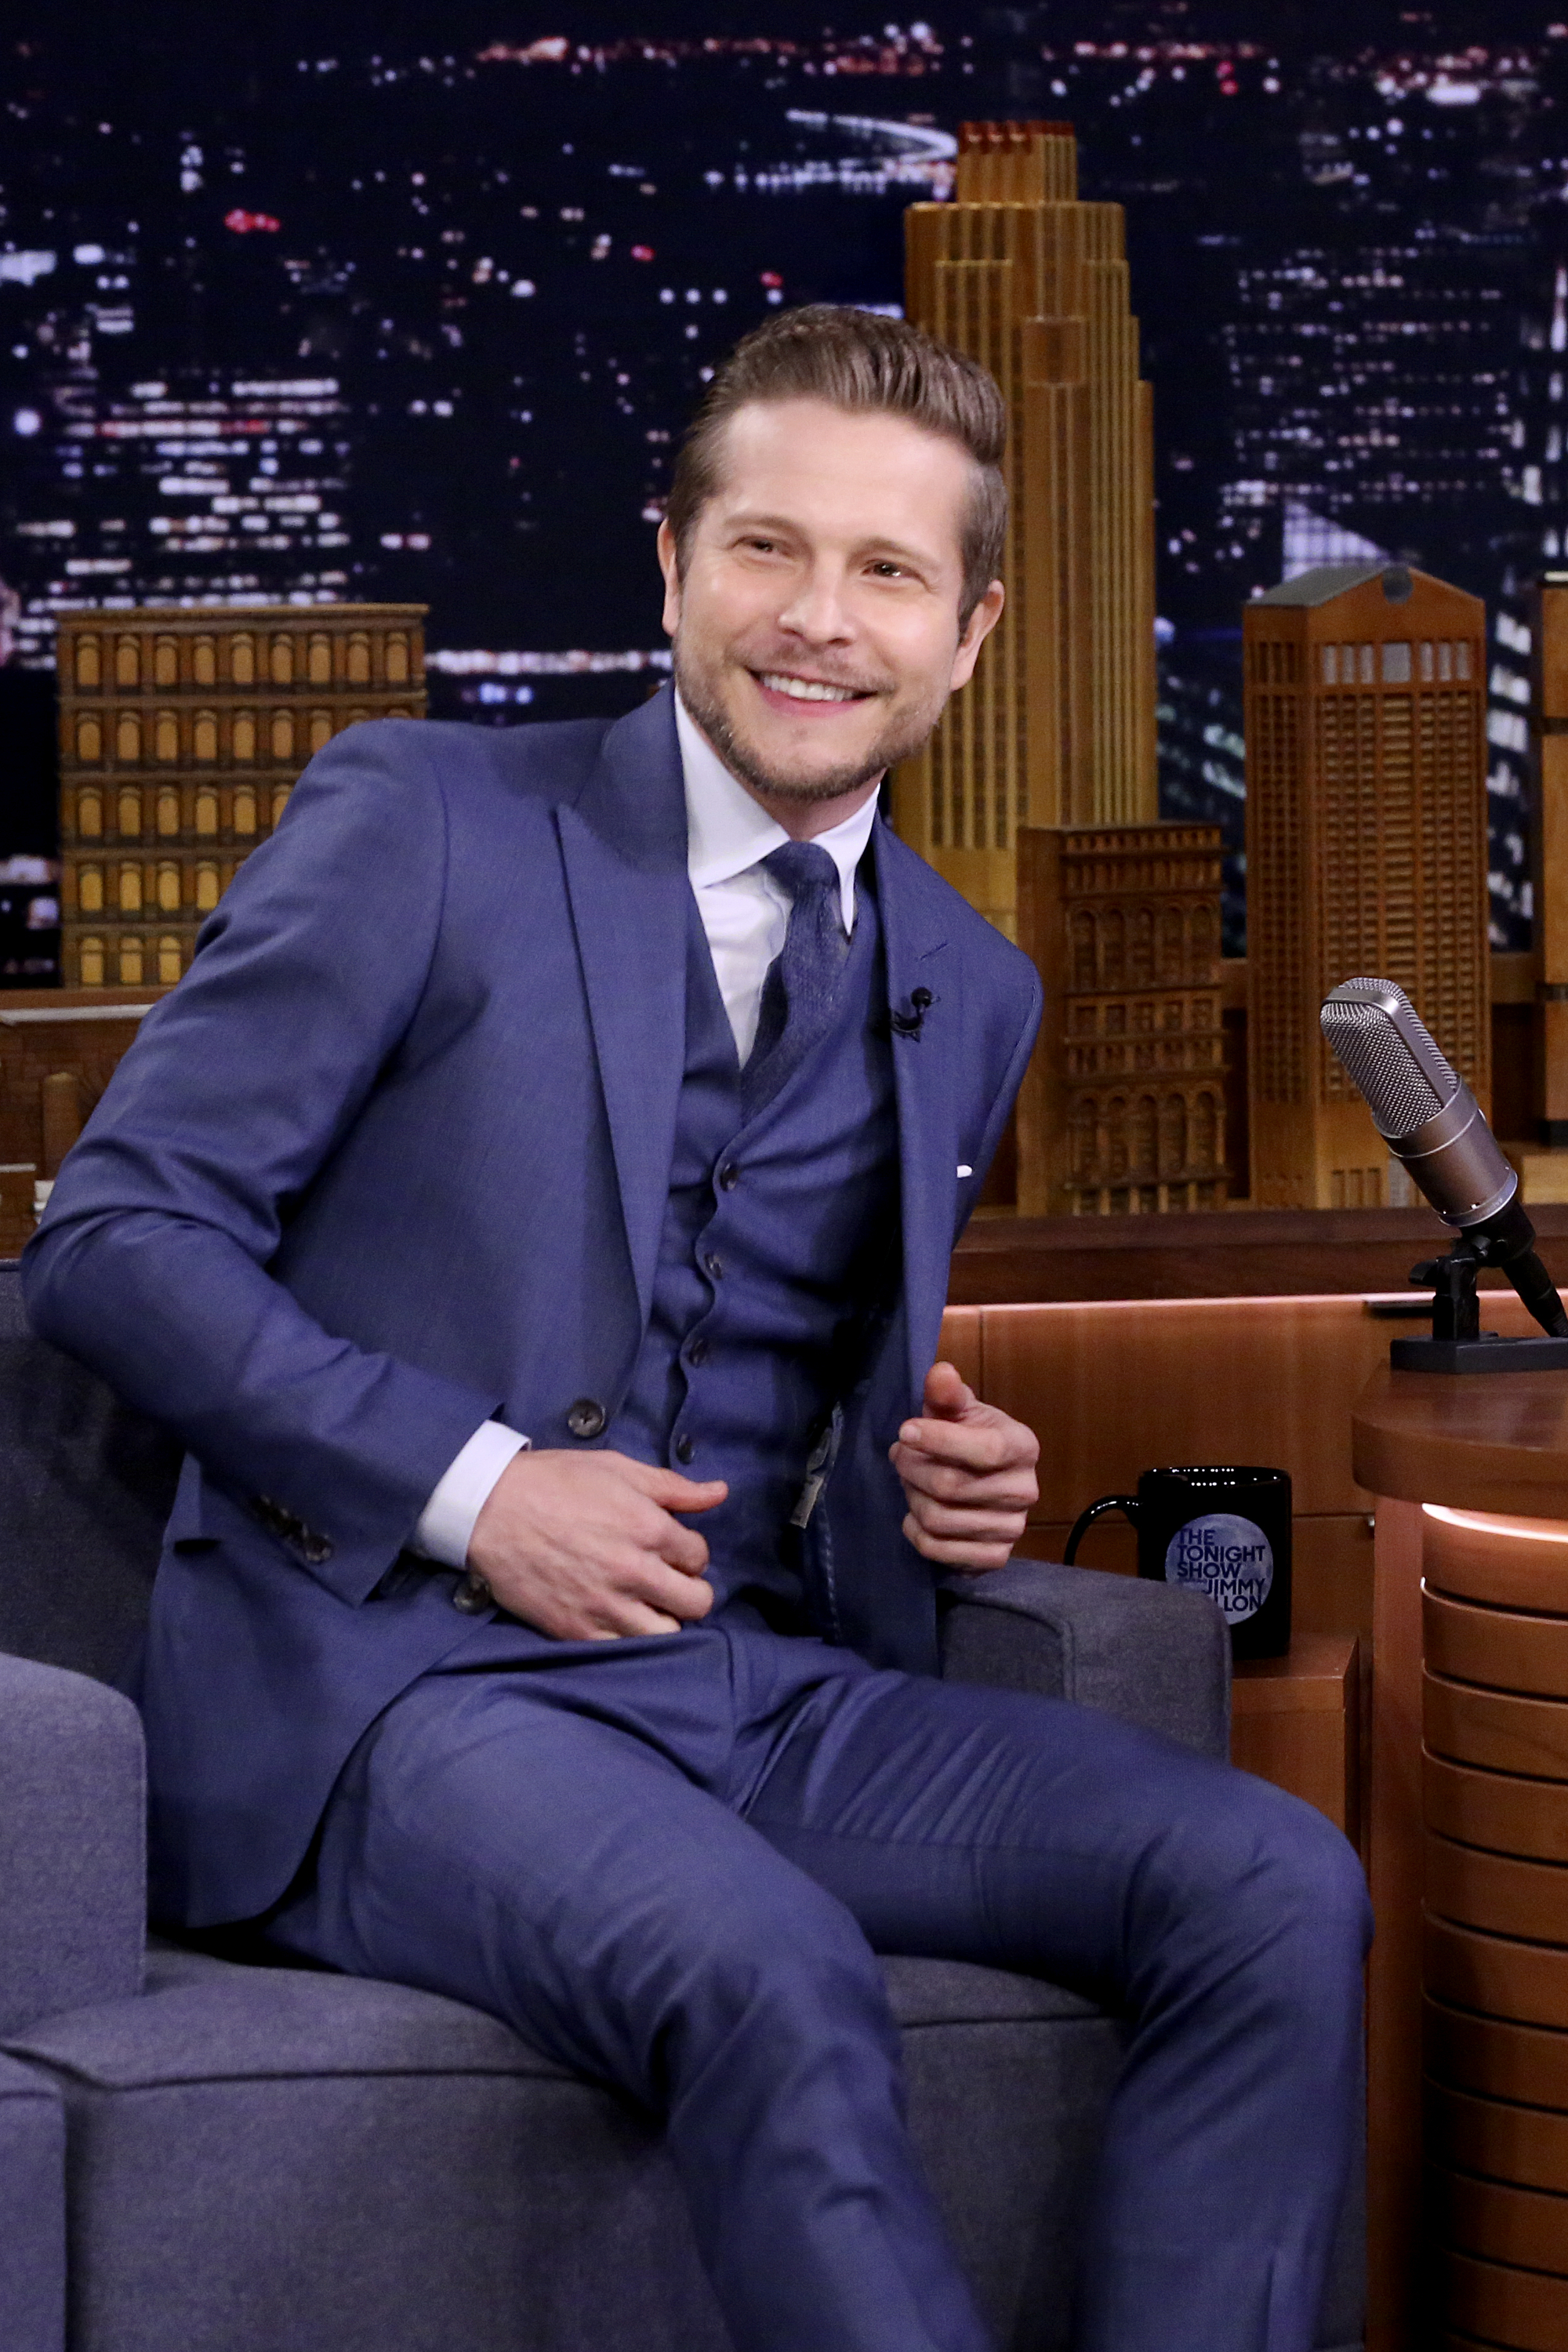 Matt Czuchry on "The Tonight Show Starring Jimmy Fallon" on September 12, 2018. | Source: Getty Images